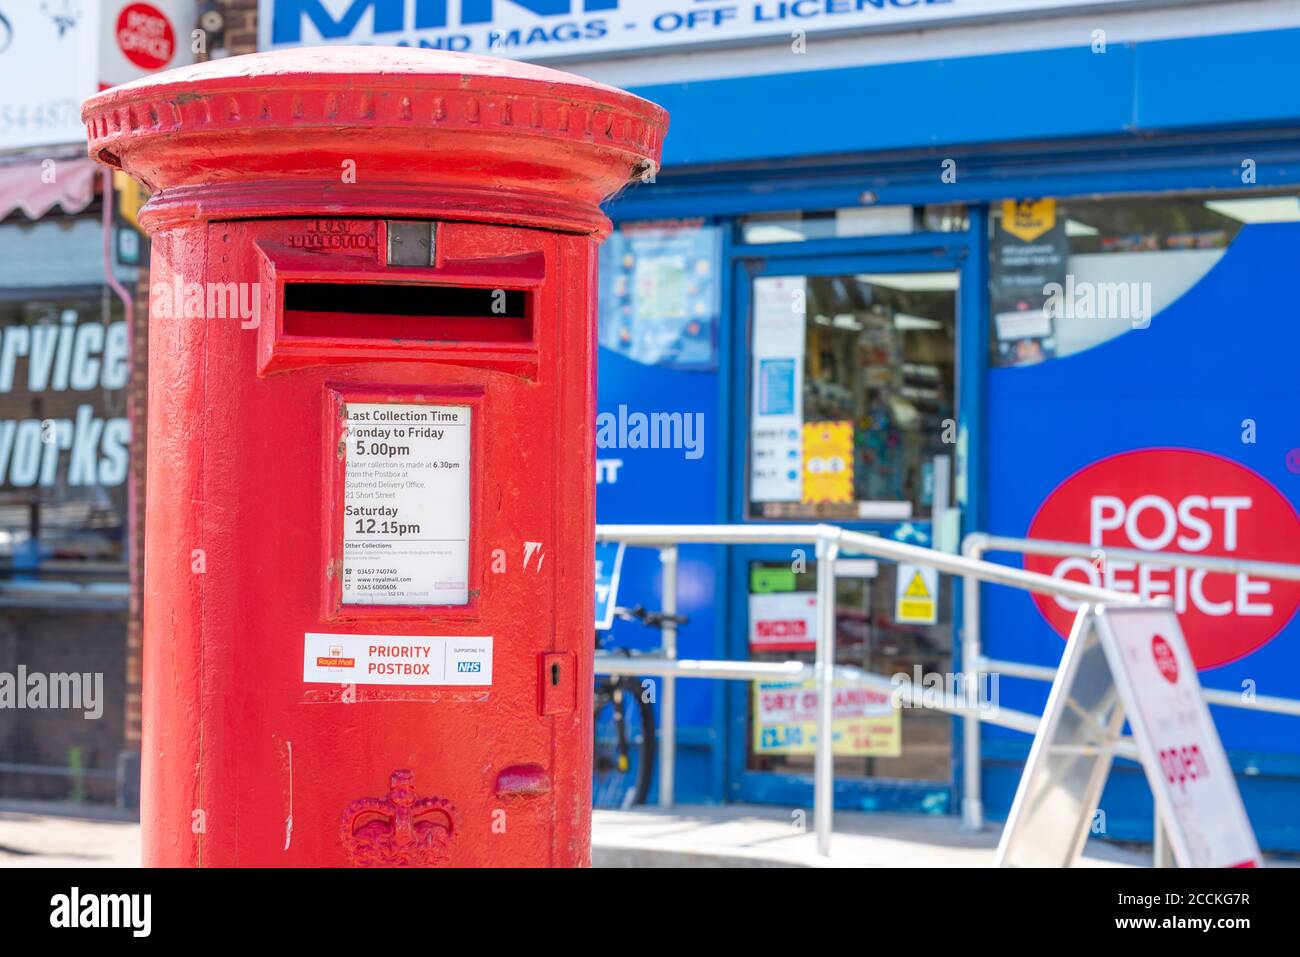 Priority post box, sign, outside a Post Office in Southend on Sea, Essex, UK, during COVID-19 Coronavirus pandemic lockdown. Mail box, letter box Stock Photo